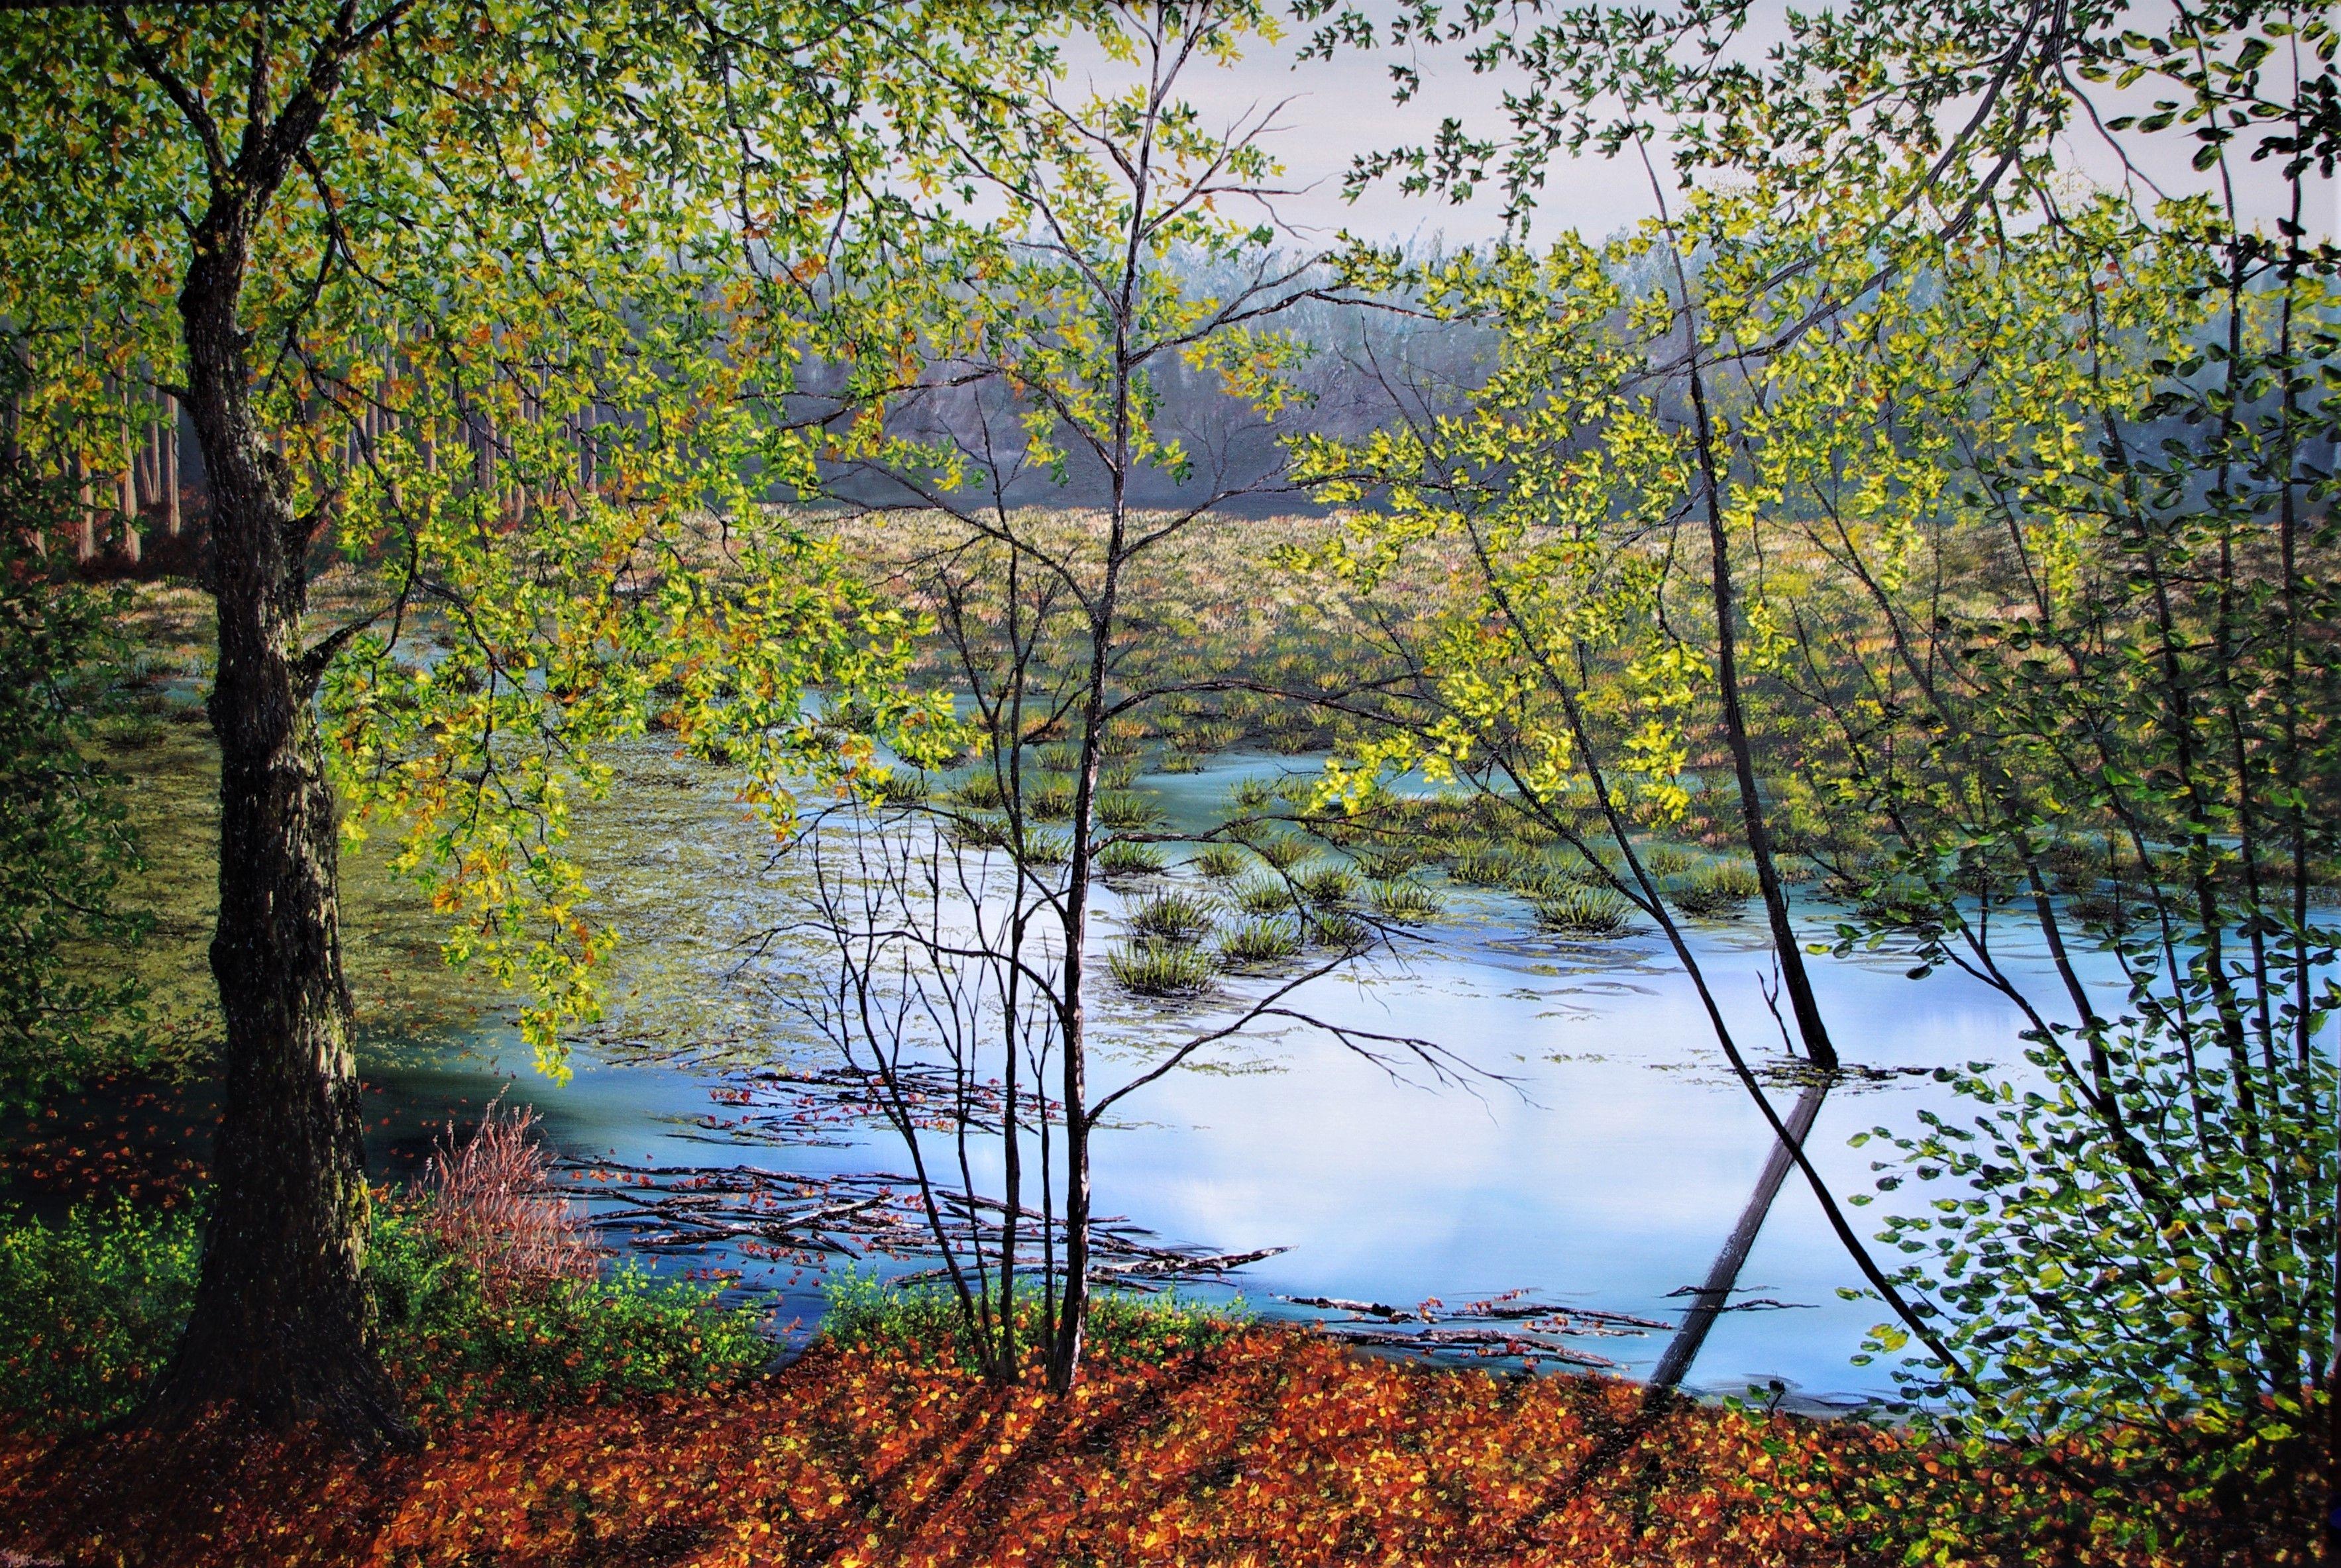 Hazel Thomson Landscape Painting - Delamere Moss in Autumn, Painting, Oil on Canvas